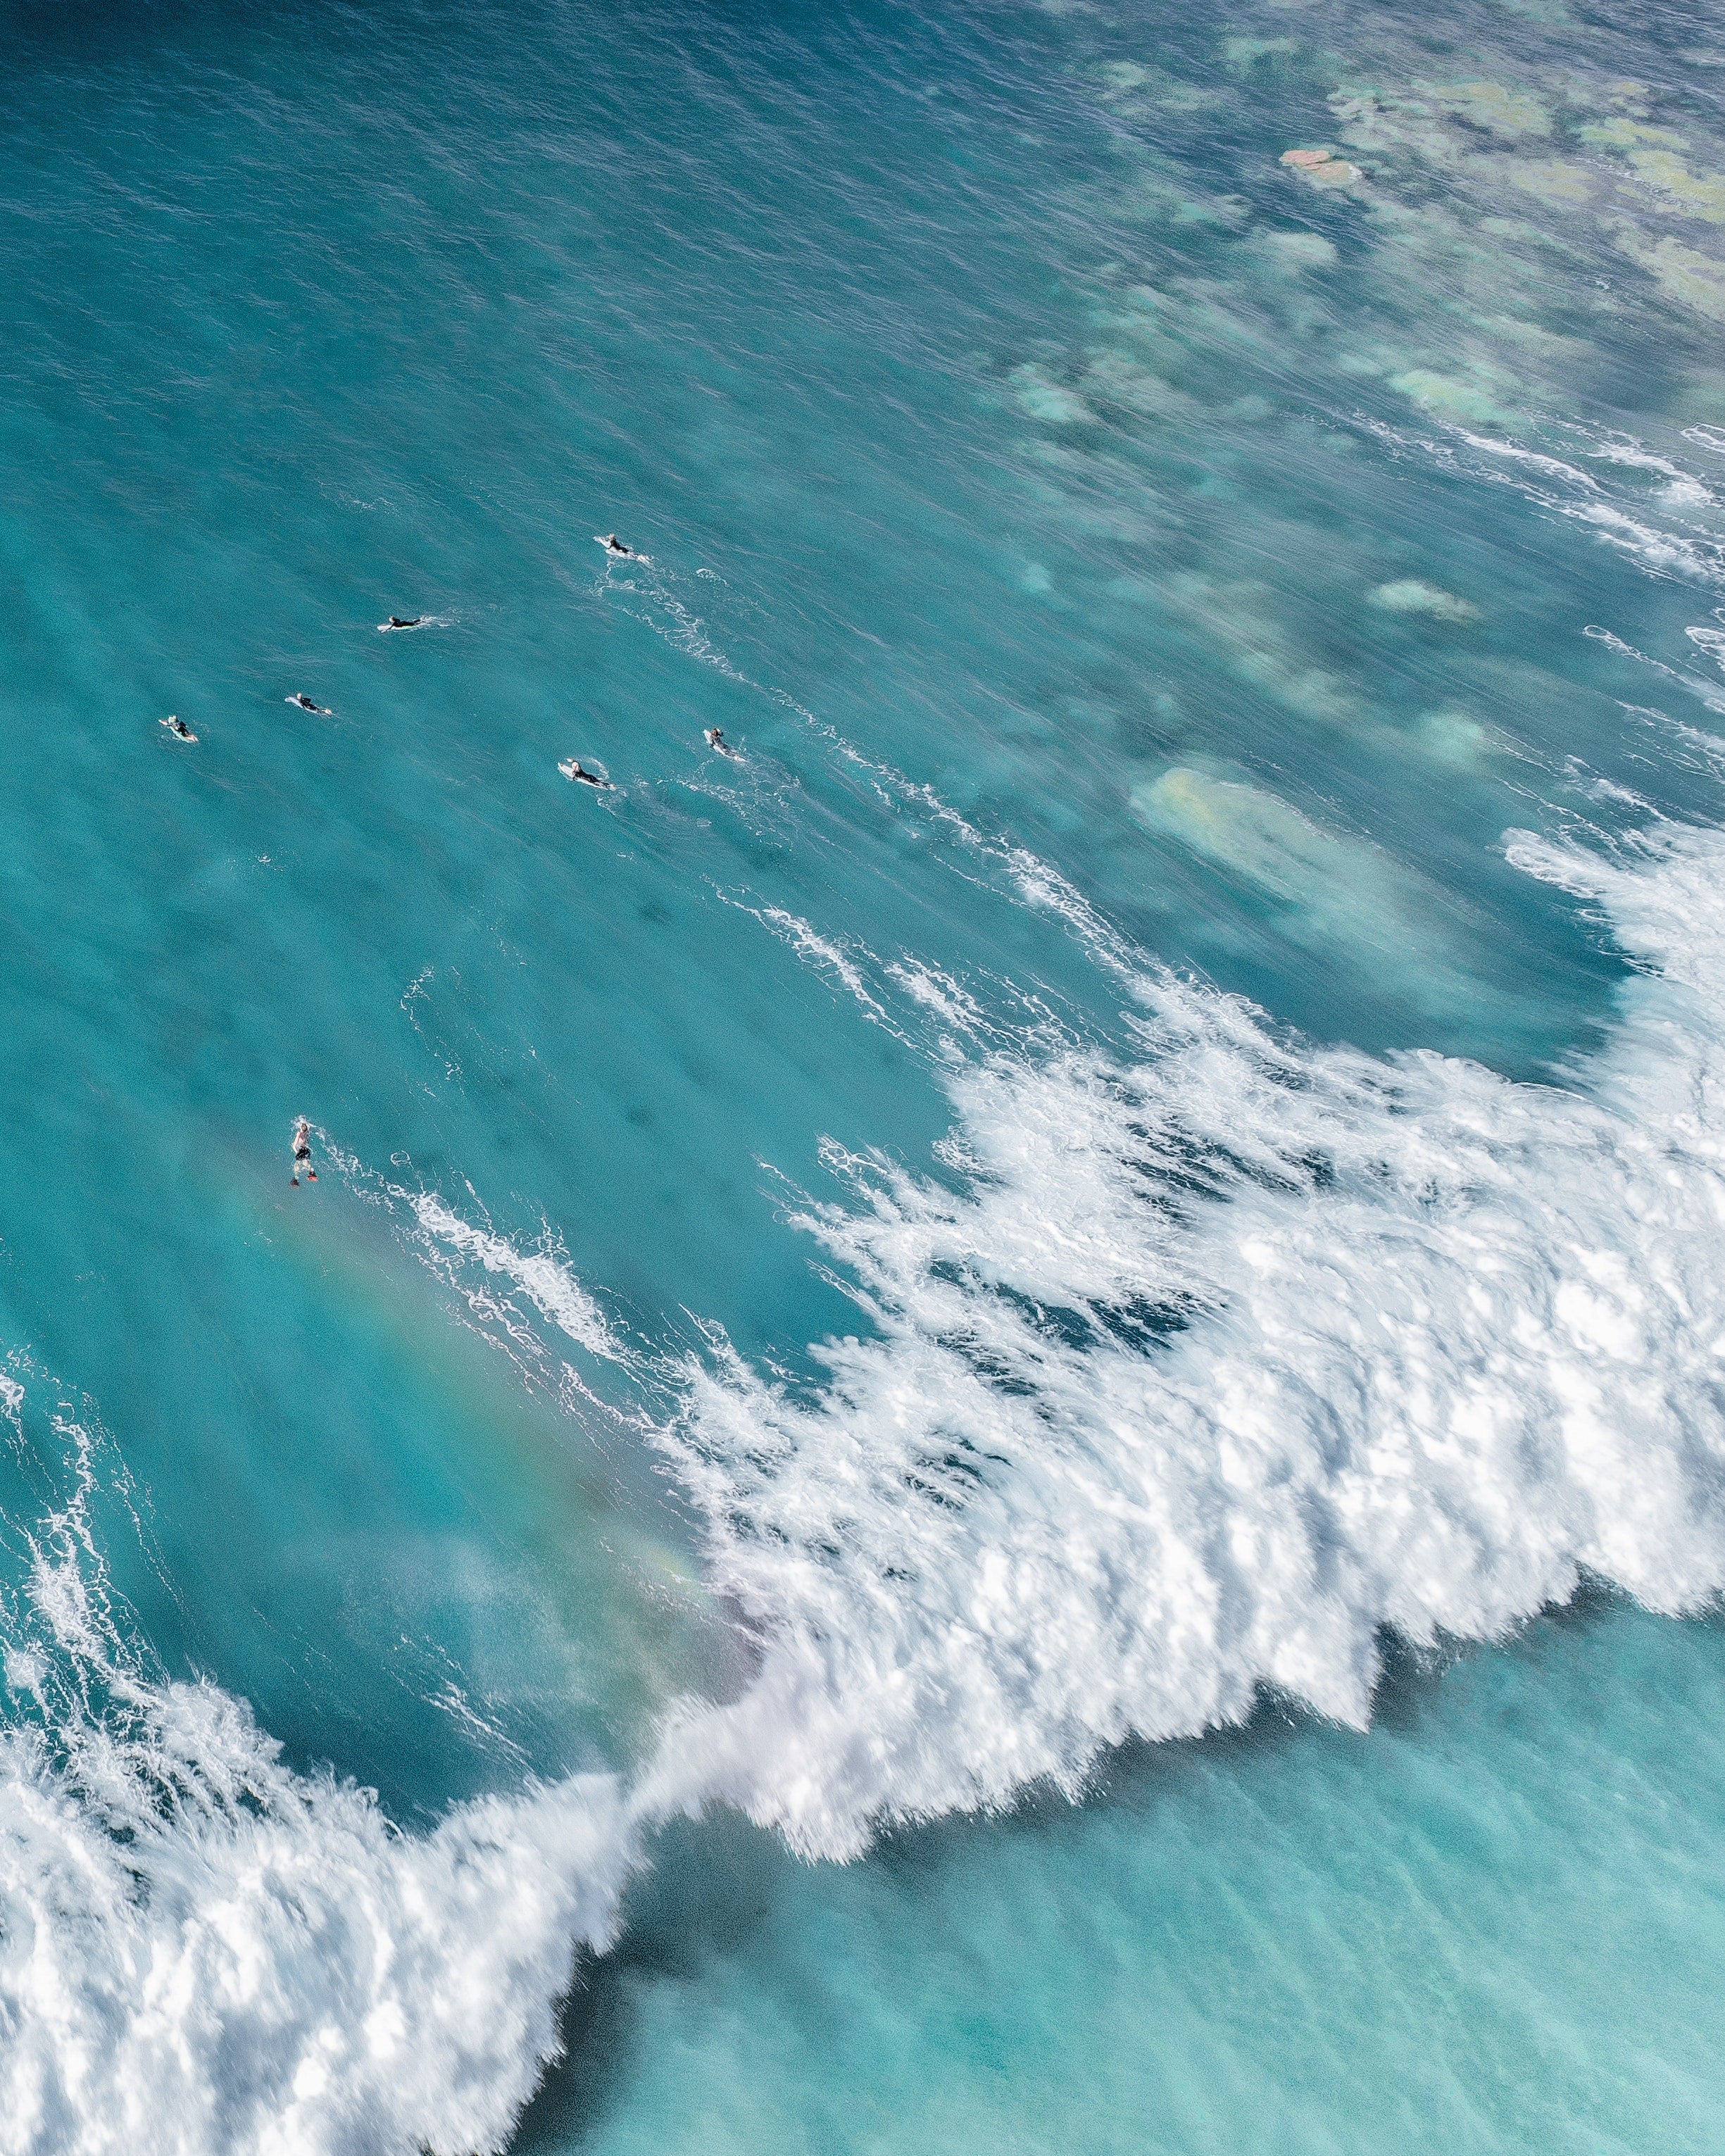 Aerial view of the ocean with wave crashing and surfers in the water